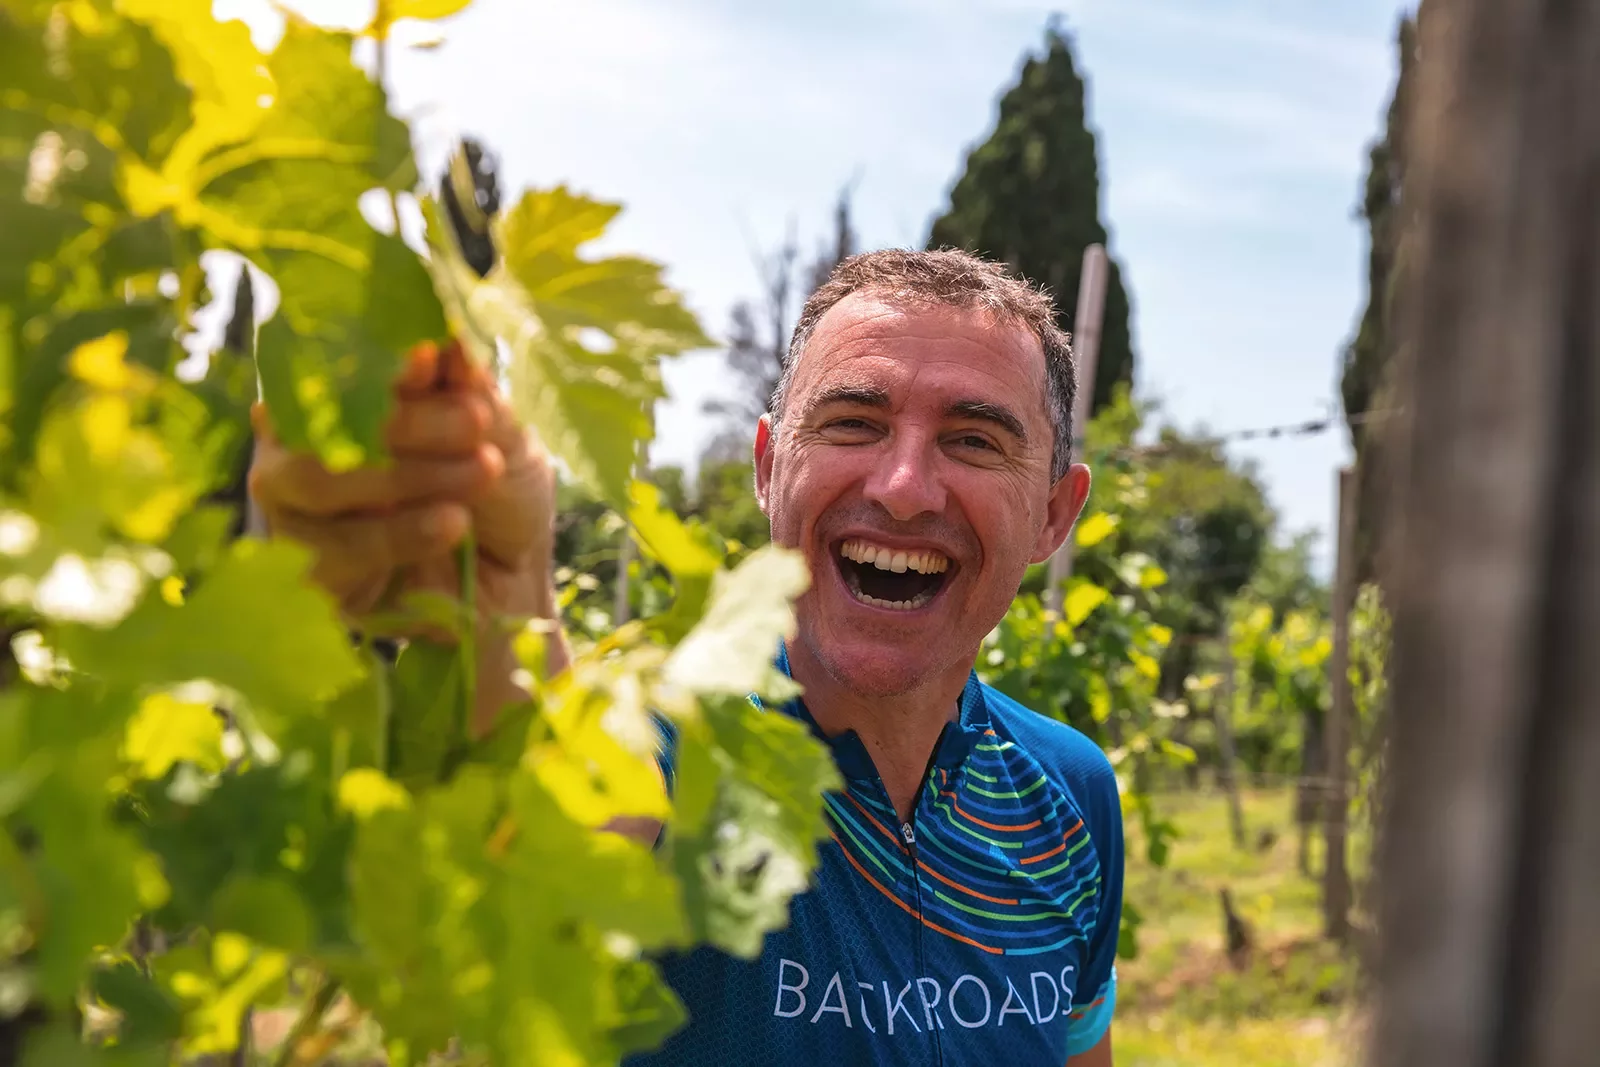 Guest laughing while inspecting grape-vine.